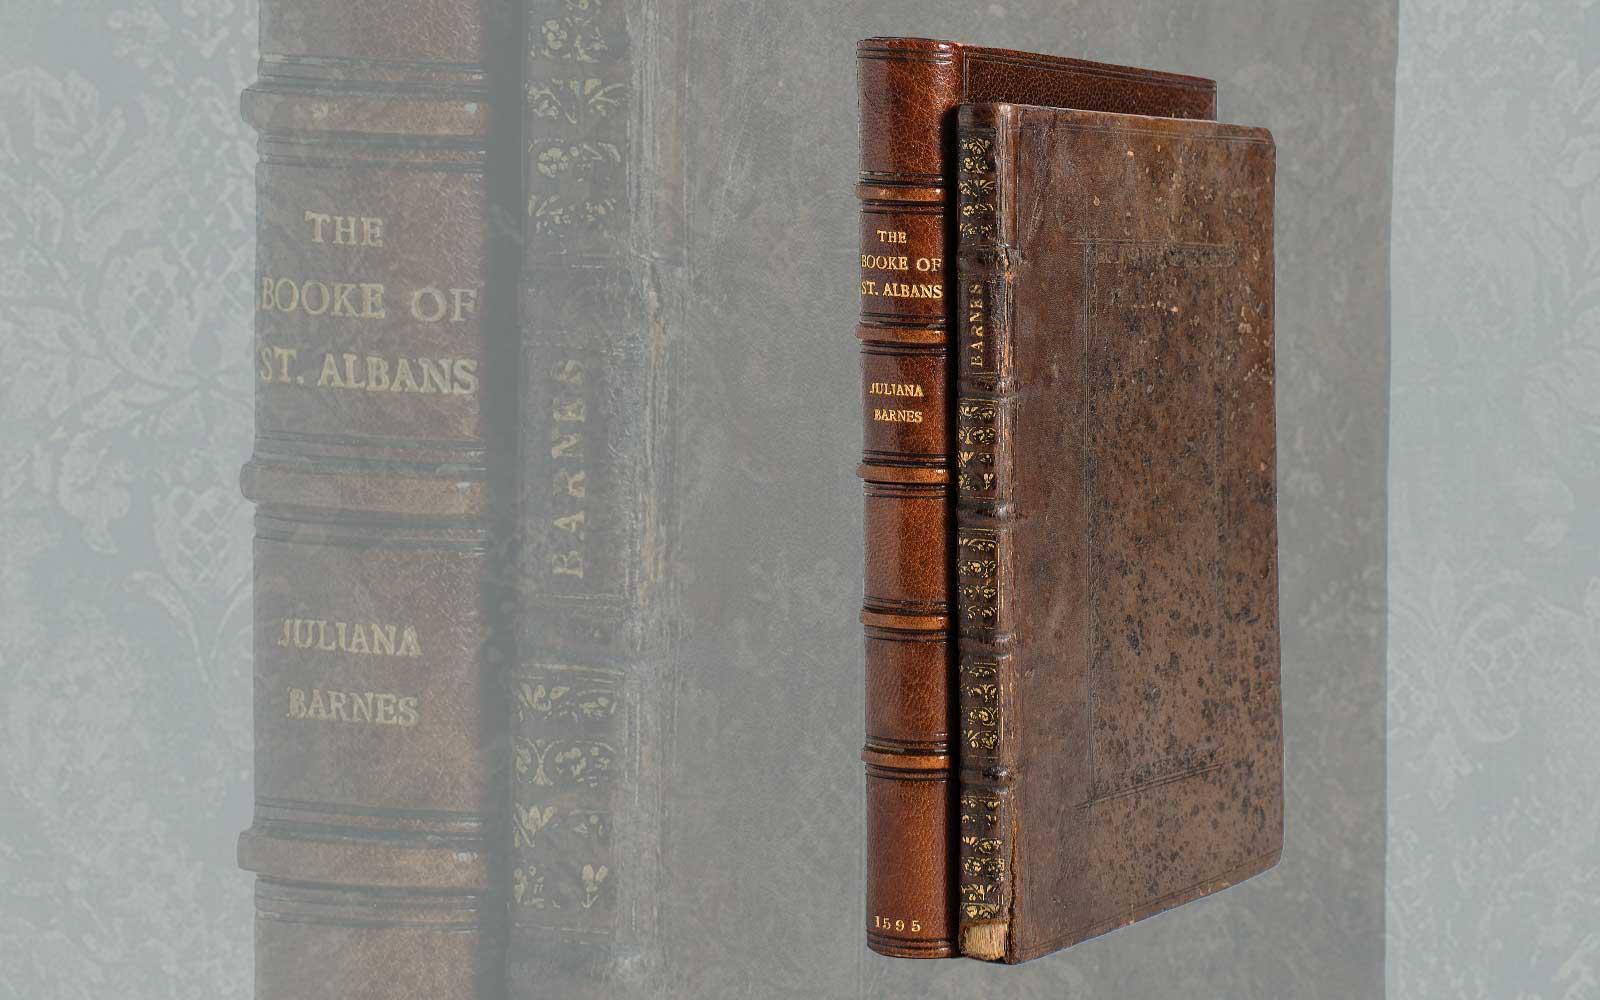 The Book of St. Alban